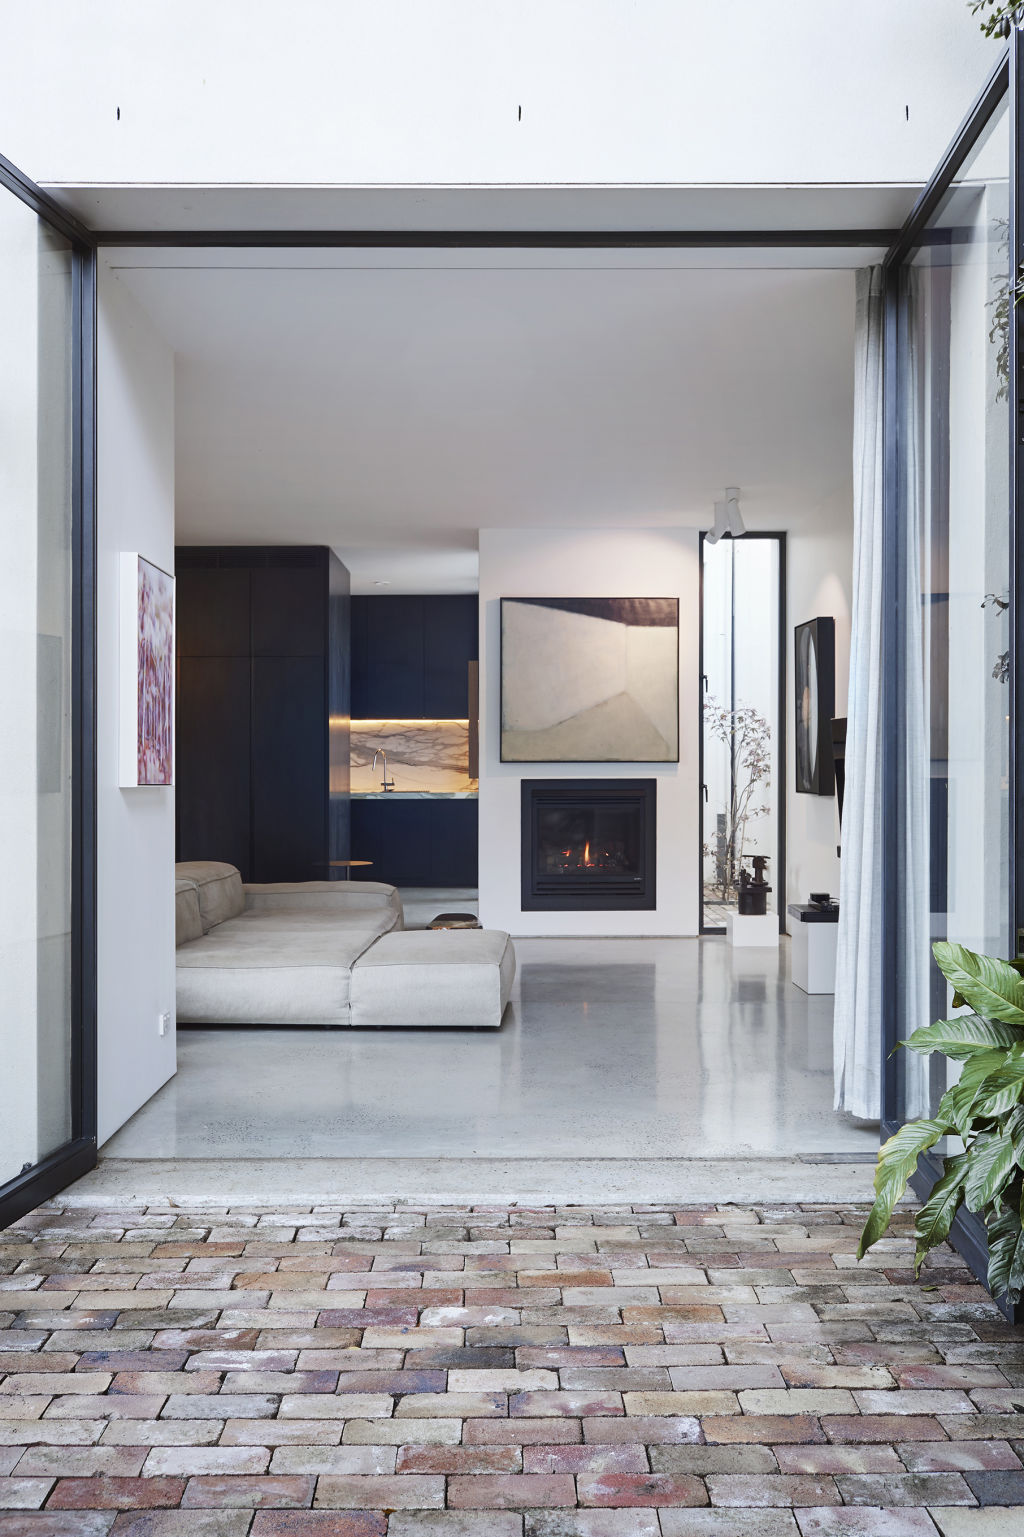 Oversized glass pivot doors look out onto a courtyard. Photo: Toby Burrows